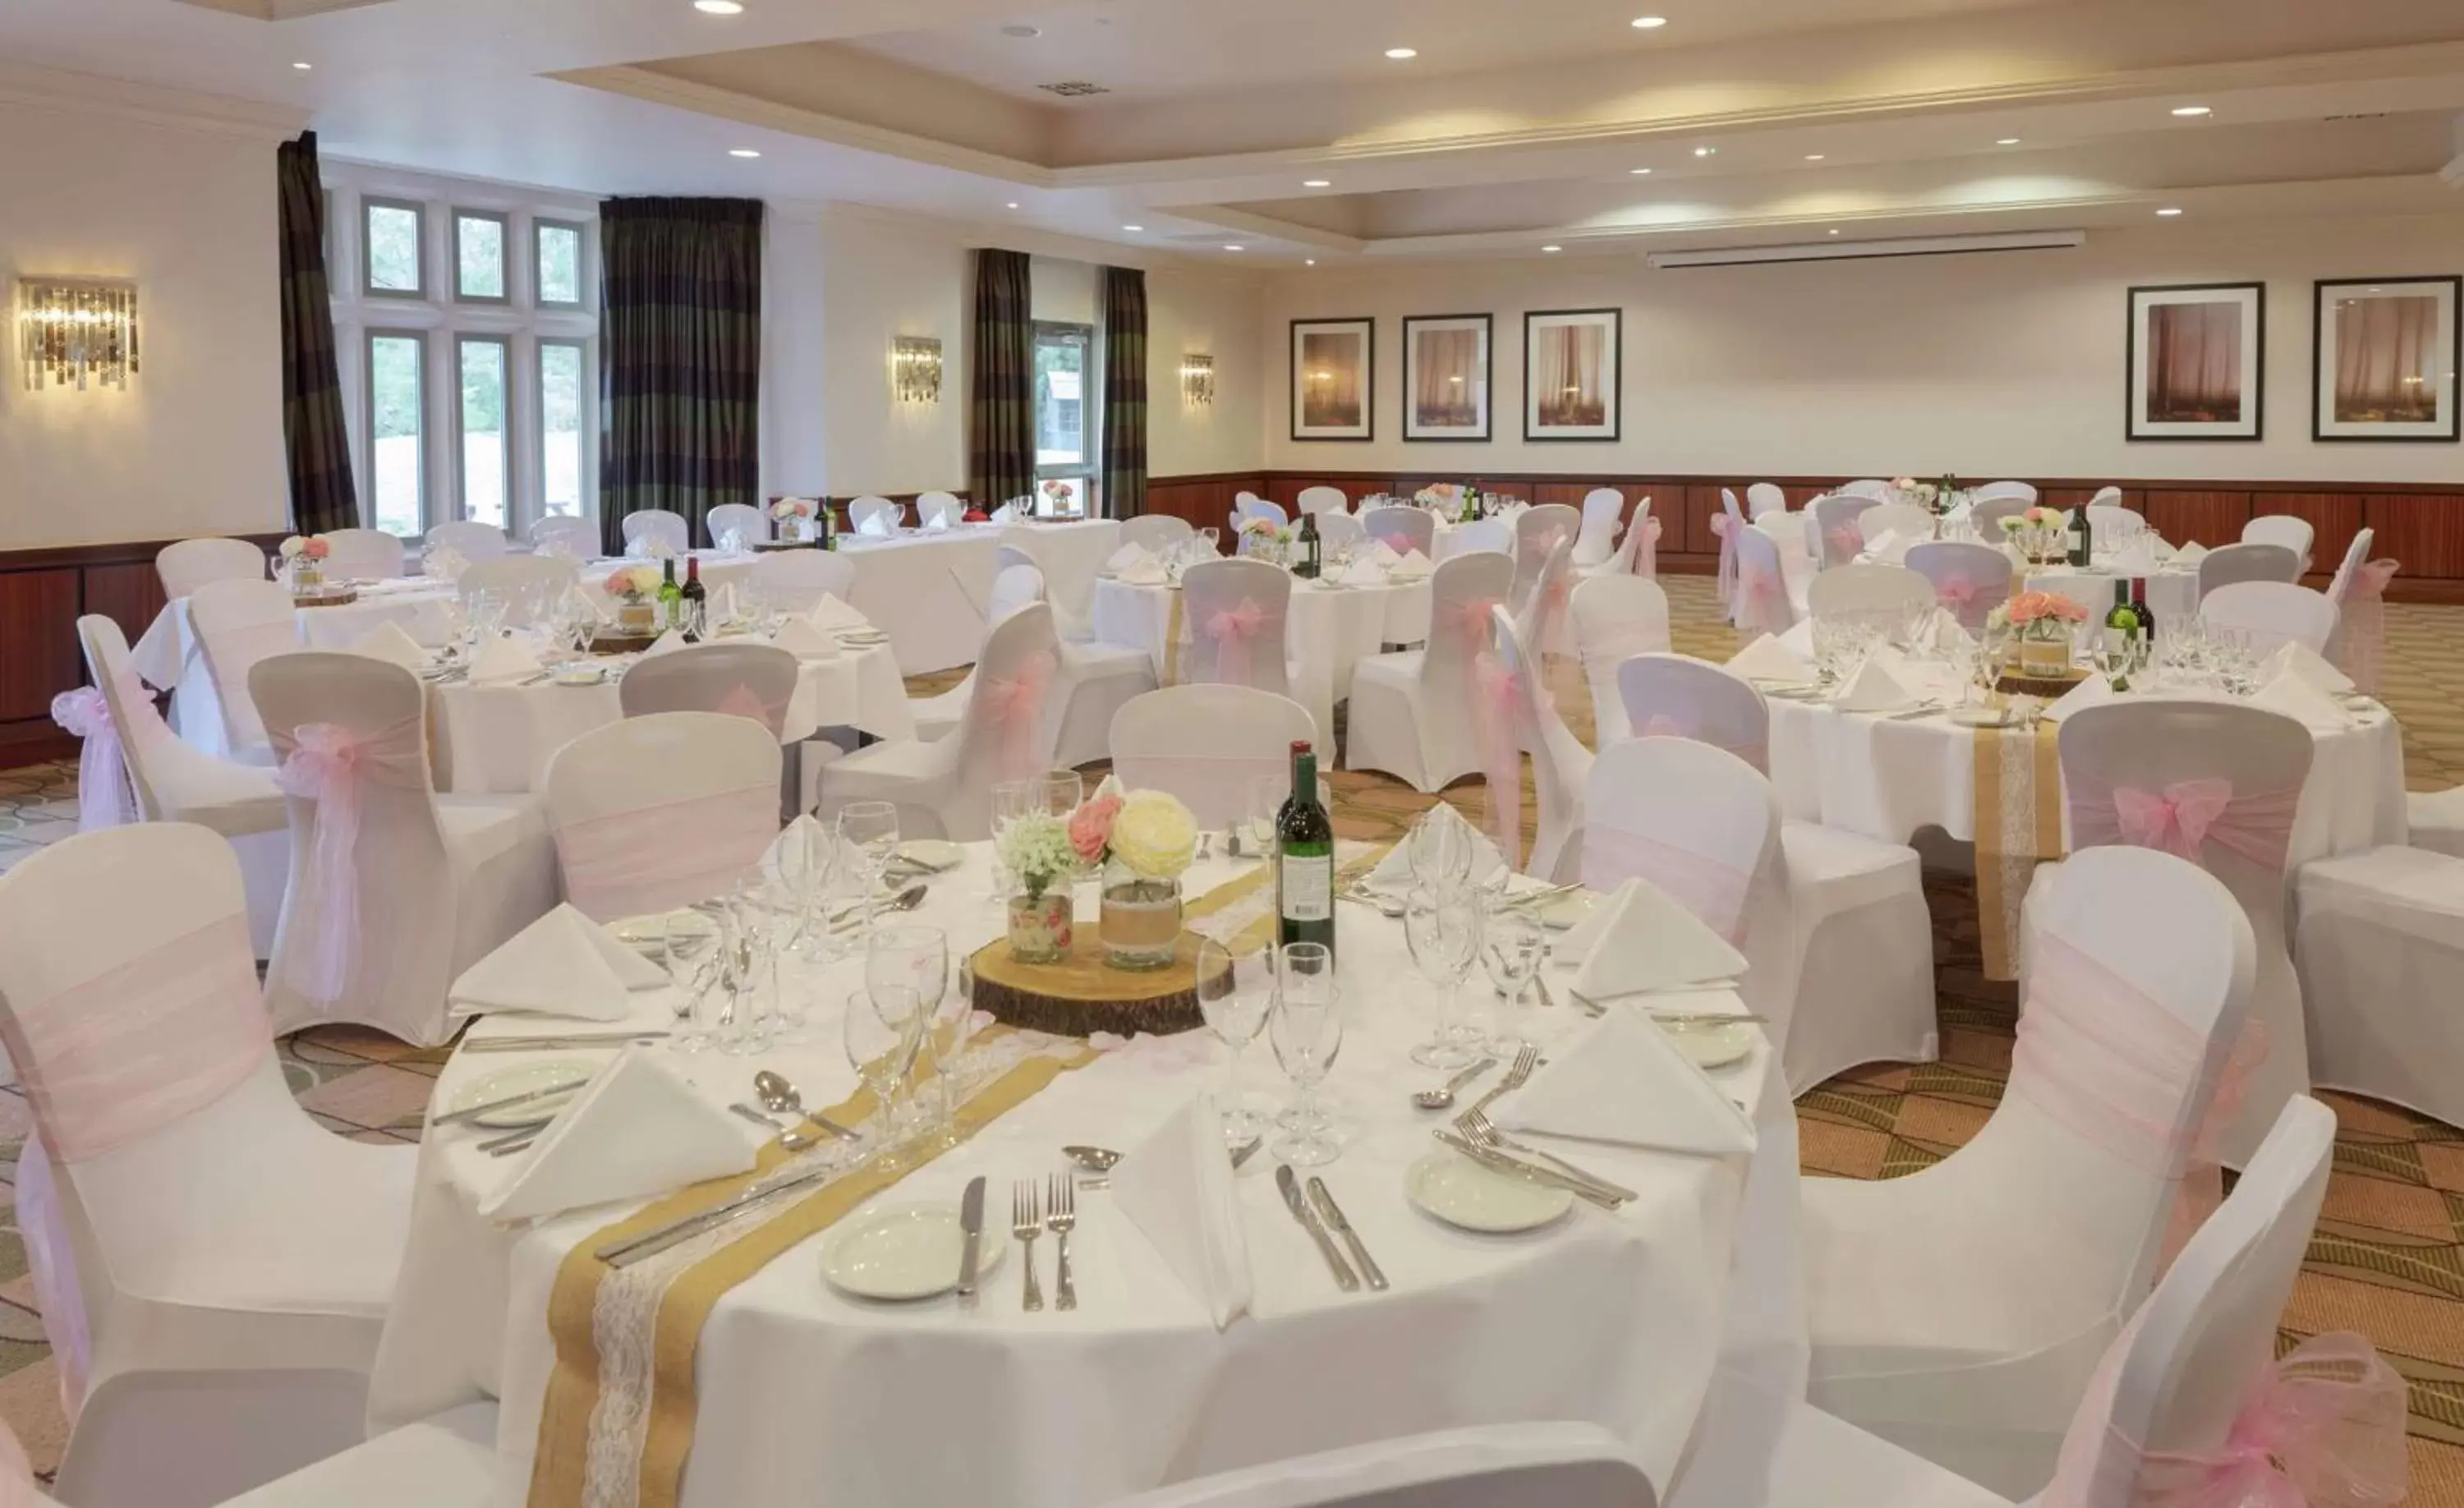 Meeting/conference room, Banquet Facilities in DoubleTree by Hilton Stratford-upon-Avon, United Kingdom